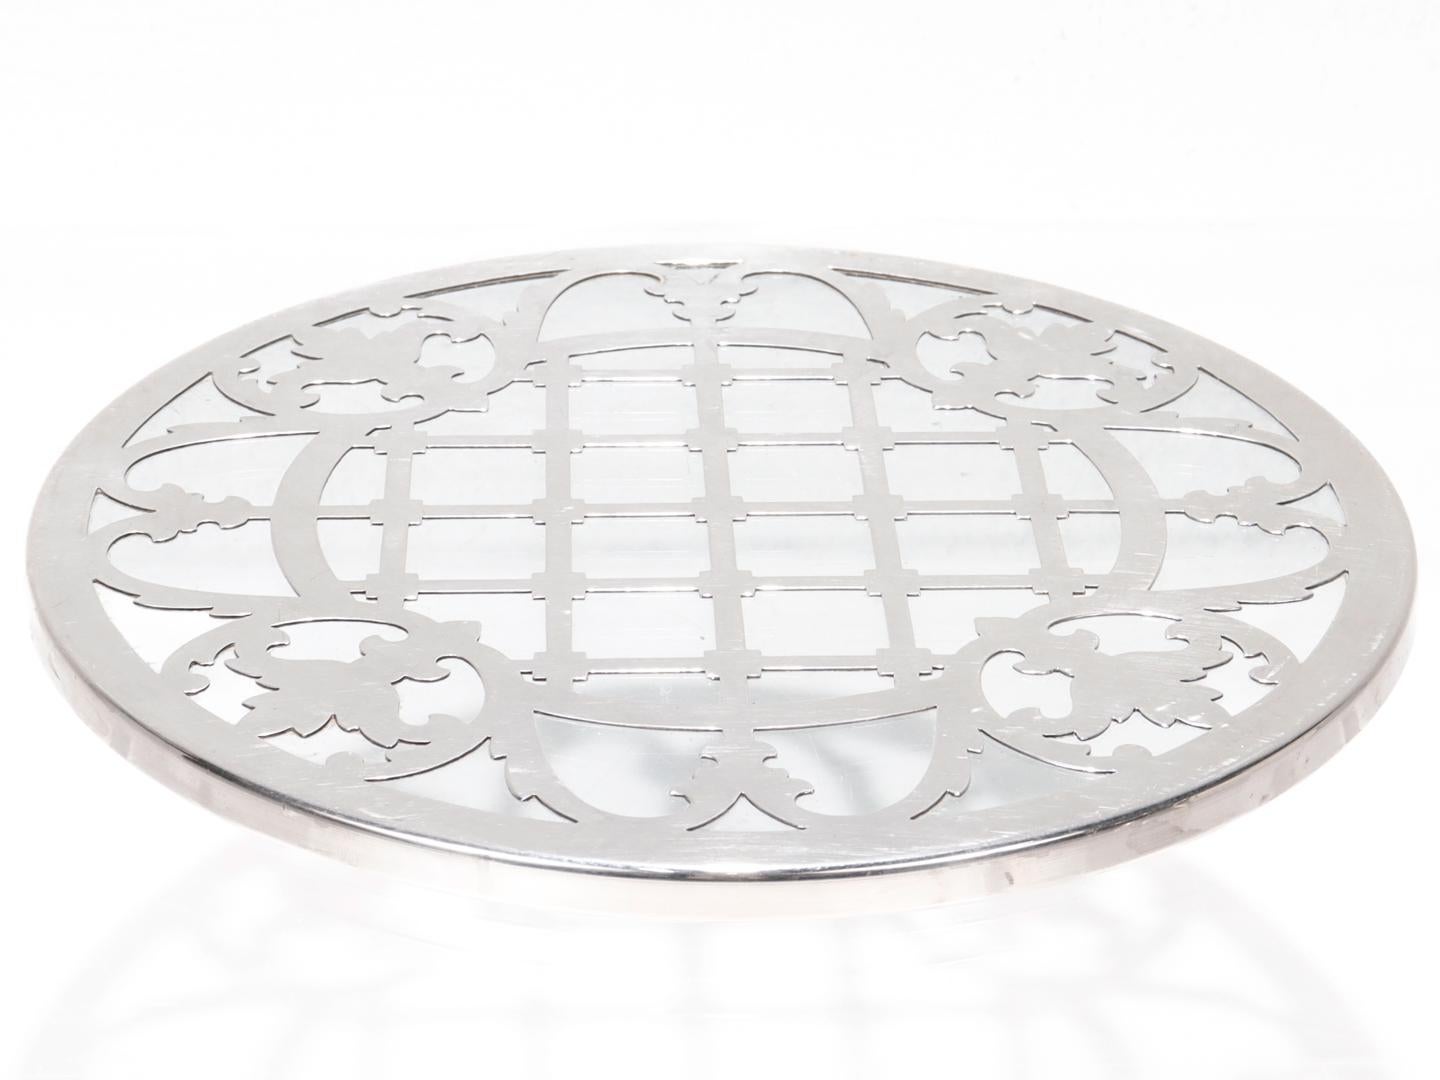 A fine antique wine trivet.

With a thick sterling silver overlay with a geometric motif on a glass base.  

Simply a wonderful trivet!

Date:
Early 20th Century

Overall Condition:
It is in overall good, as-pictured, used estate